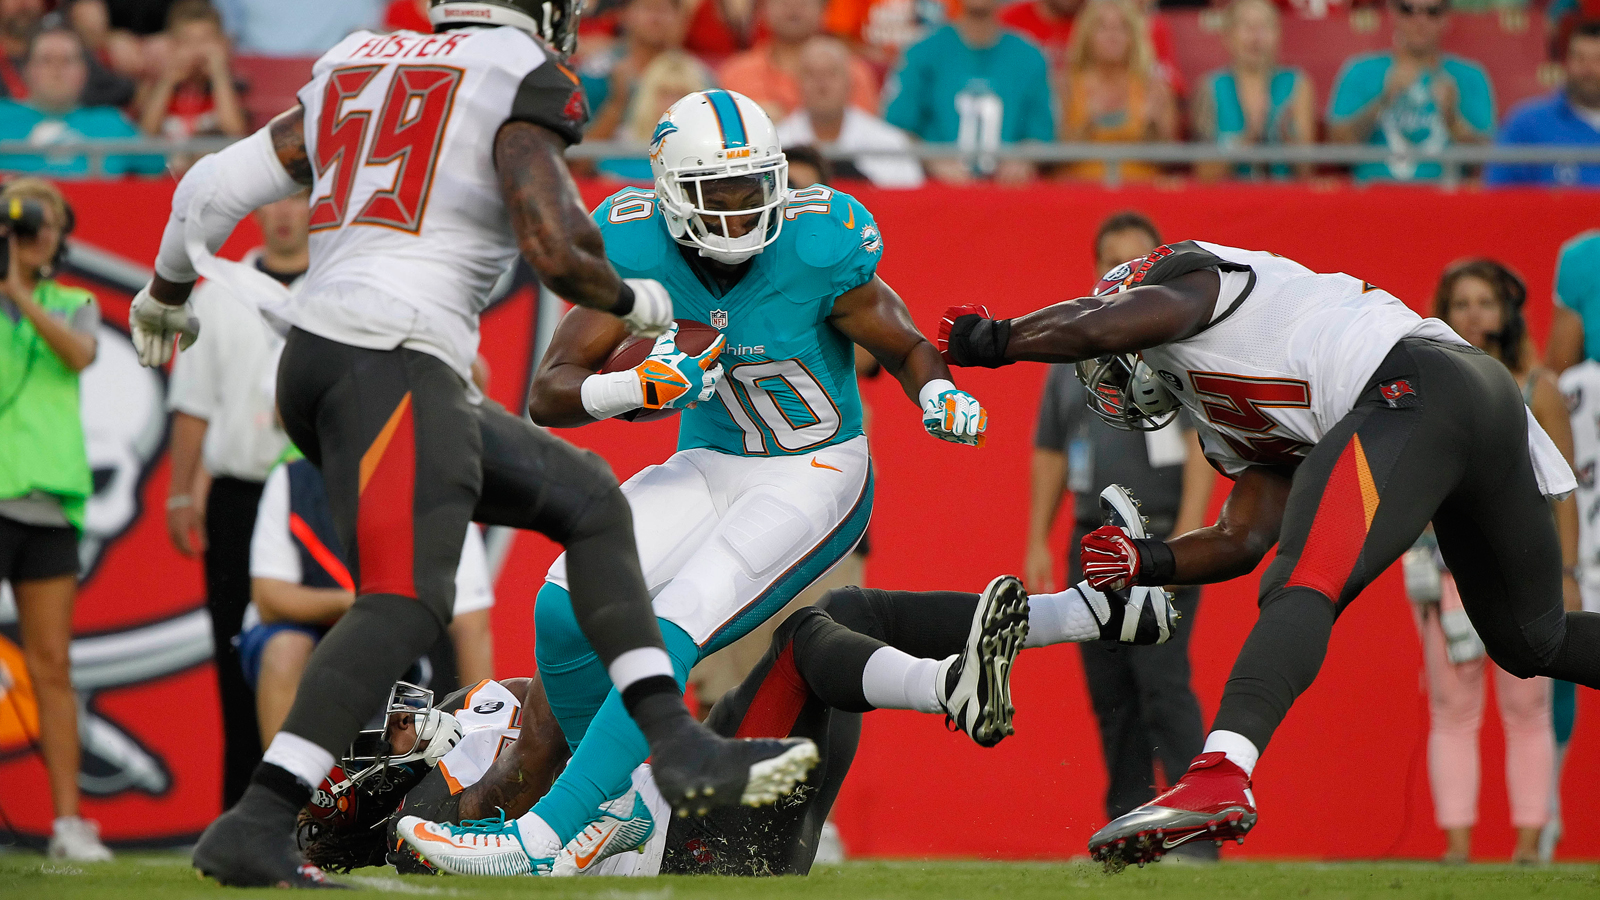 Phins News Another Look At The 1st Preseason Game